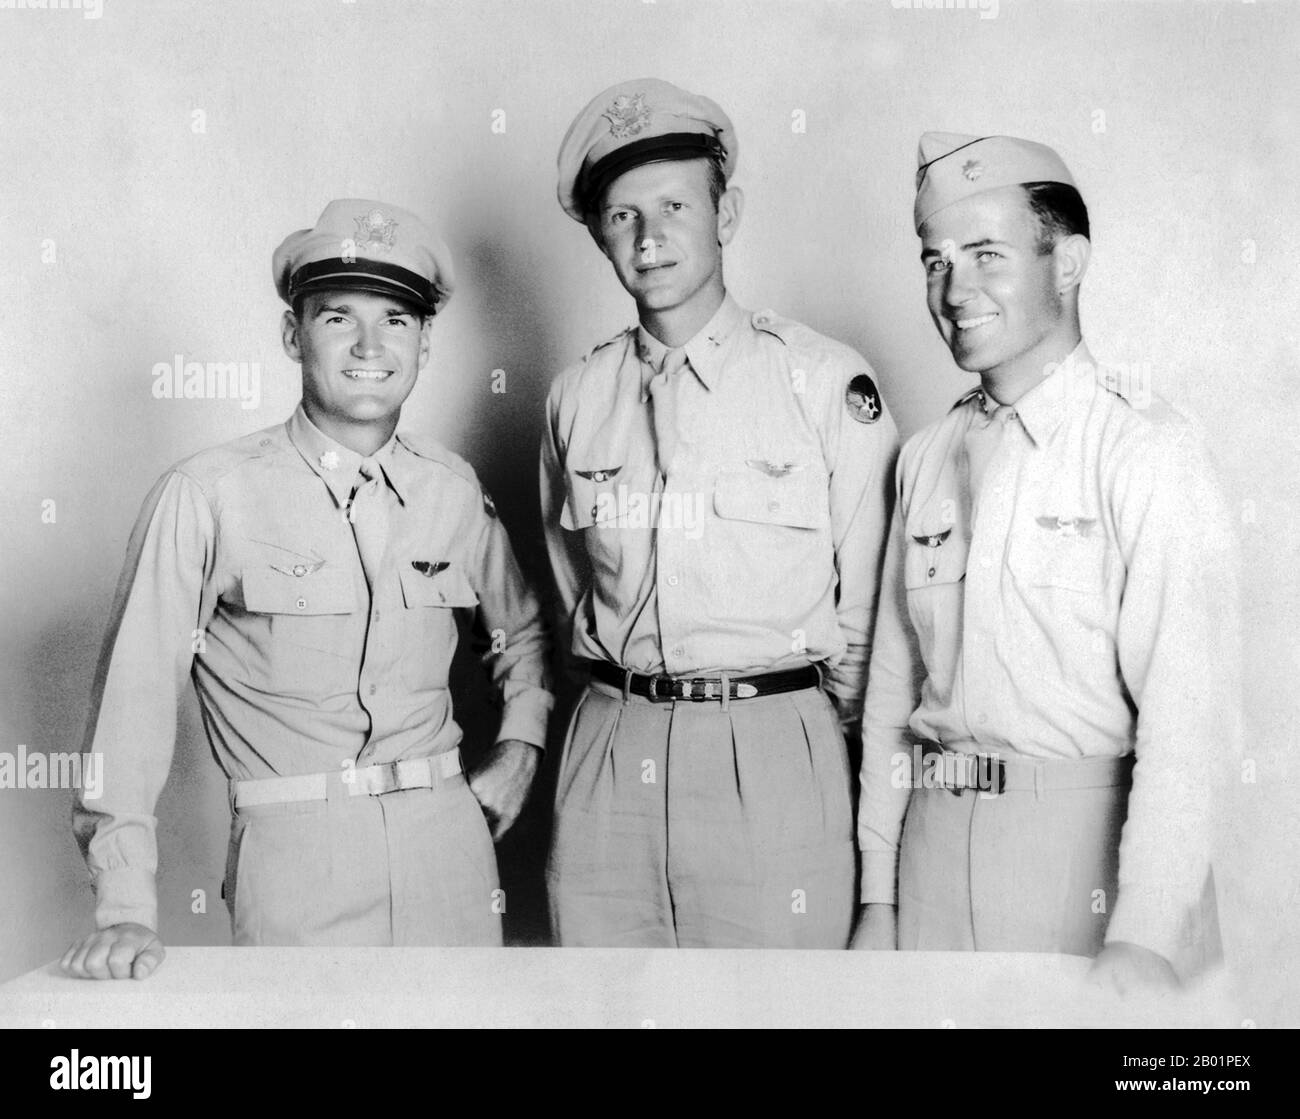 China/USA: Flying Tigers Charlie Bond, Tex Hill and Ed Rector. All three received the British Flying Cross for gallantry in Burma from Lord Halifax, in Washington, D.C., in 1943.  'Flying Tigers' was the popular name for the 1st American Volunteer Group (AVG) of the Chinese Air Force in 1941-1942. The pilots were United States Army (USAAF), Navy (USN), and Marine Corps (USMC) personnel, recruited under presidential sanction and commanded by Claire Lee Chennault; the ground crew and headquarters staff were likewise mostly recruited from the U.S. military, along with some civilians. Stock Photo